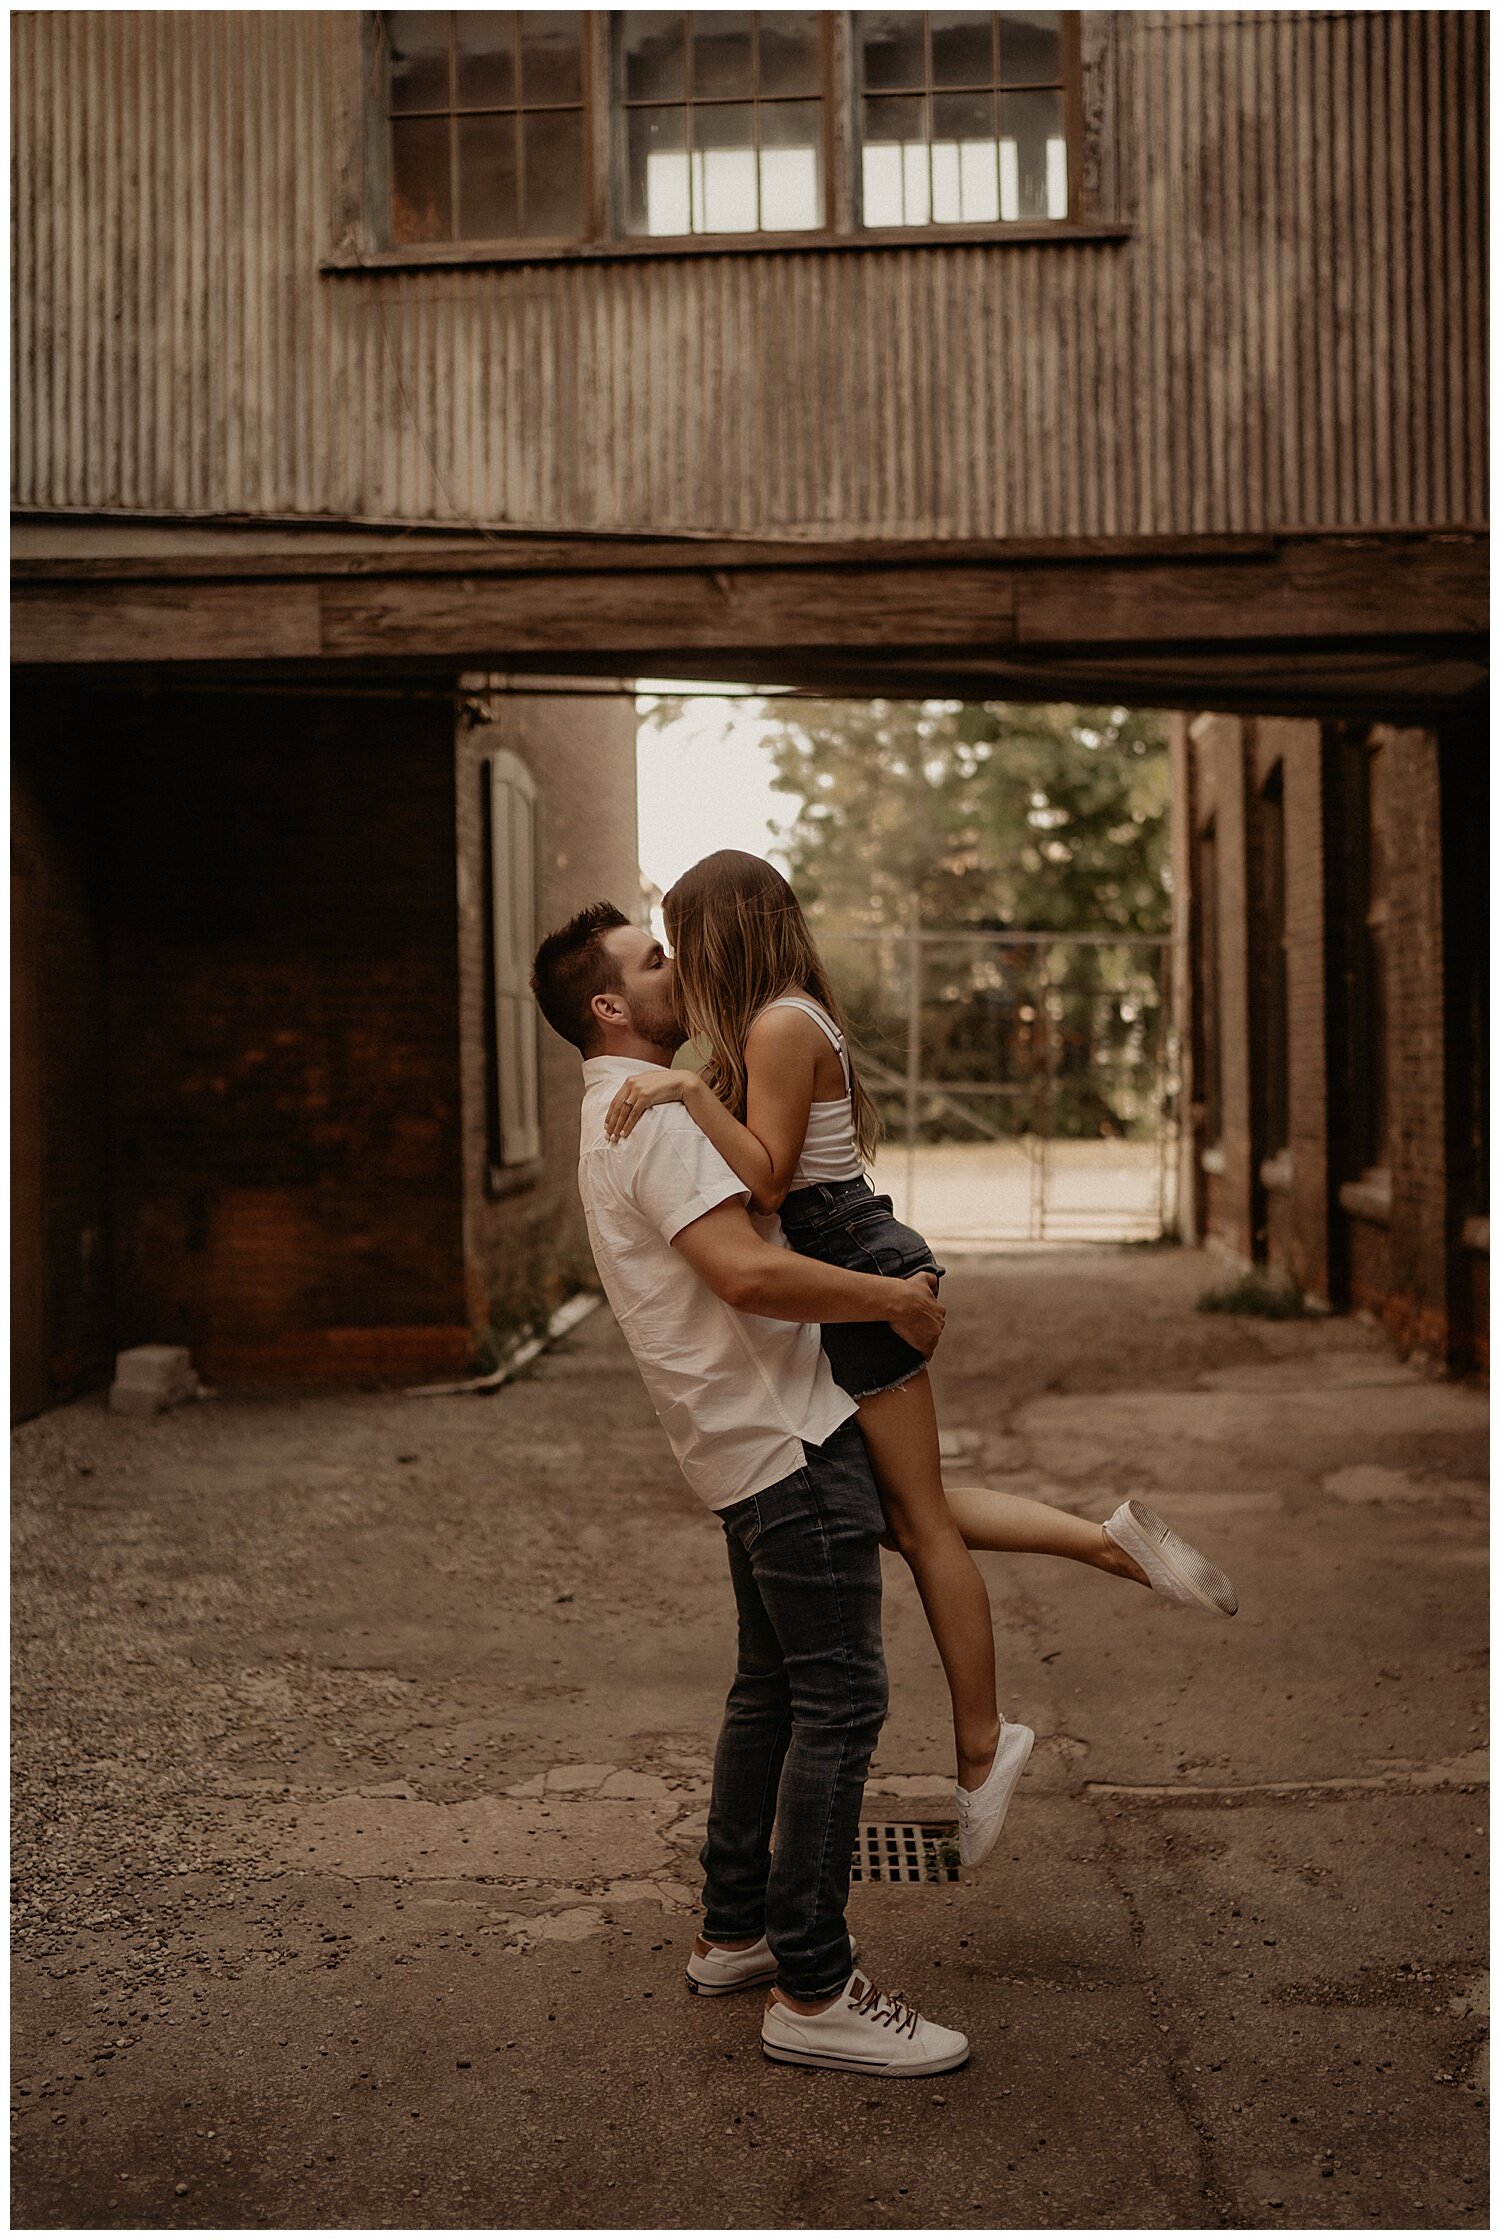 Cotton_Factory_And_Waterfall_Engagement_Session_Hamilton_Ontario_Wedding_Photographer_0013.jpg